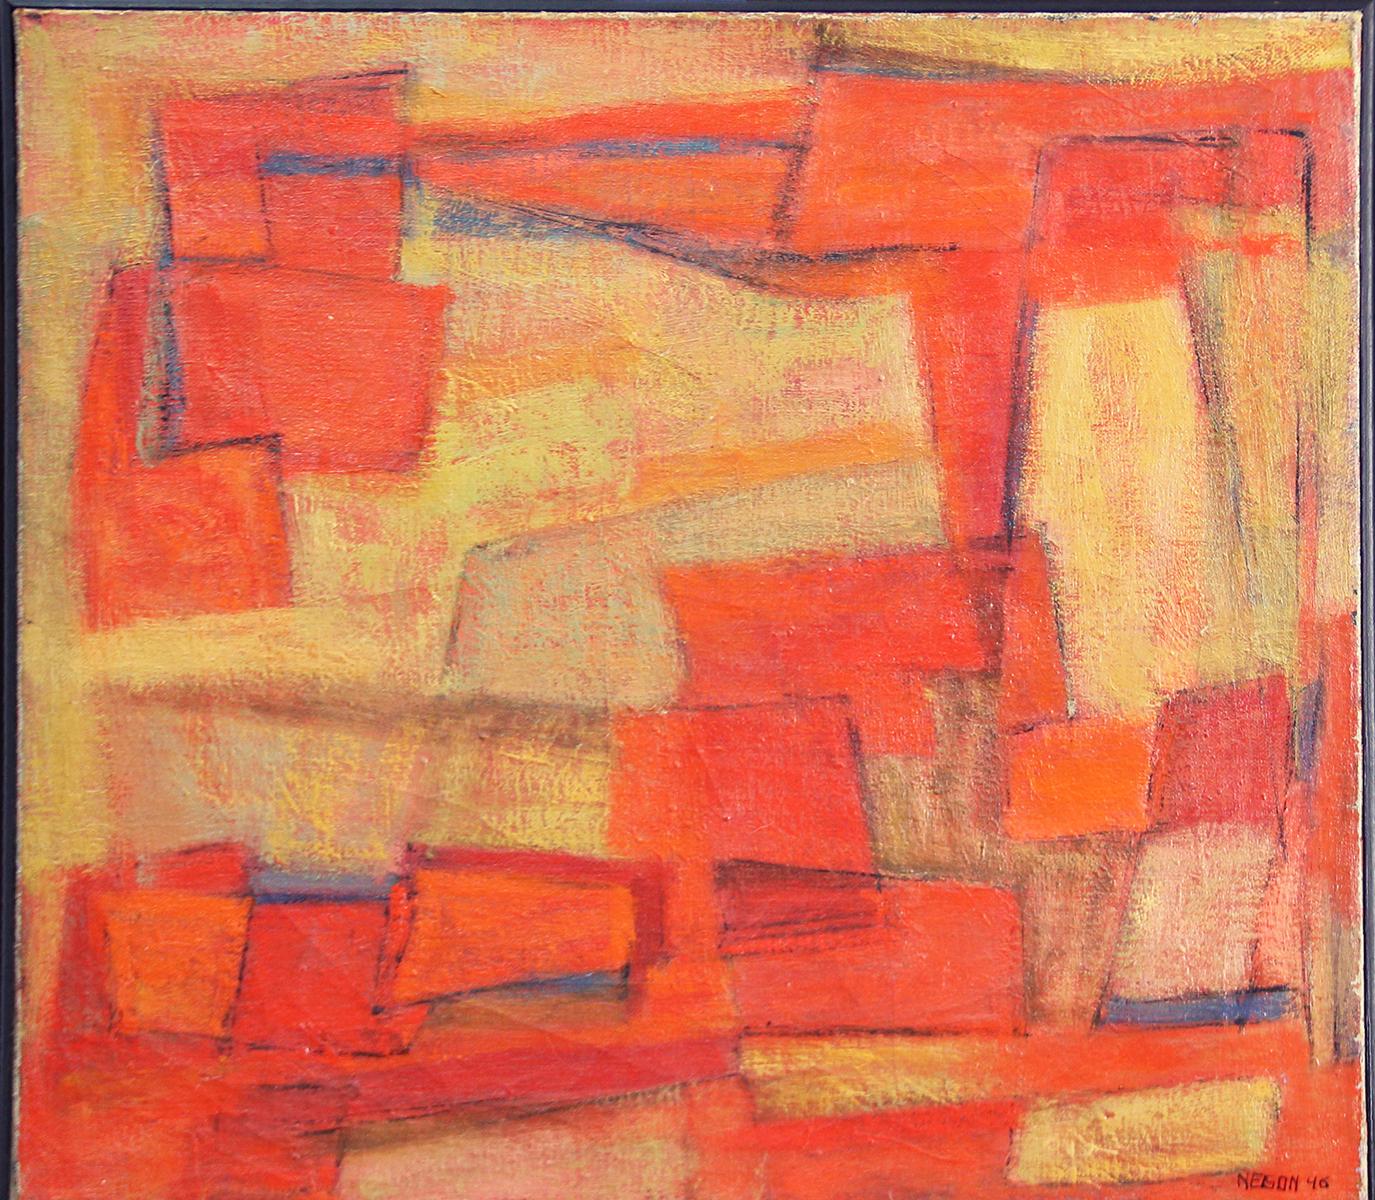 "Orange Abstract" by Leonard Nelson is an 18" x 20" oil on canvas abstract painting. It comes from a Private Collection in West Chester, Pennsylvania. The painting is unframed, signed and dated "Nelson 46" on the lower right. Additional shipping